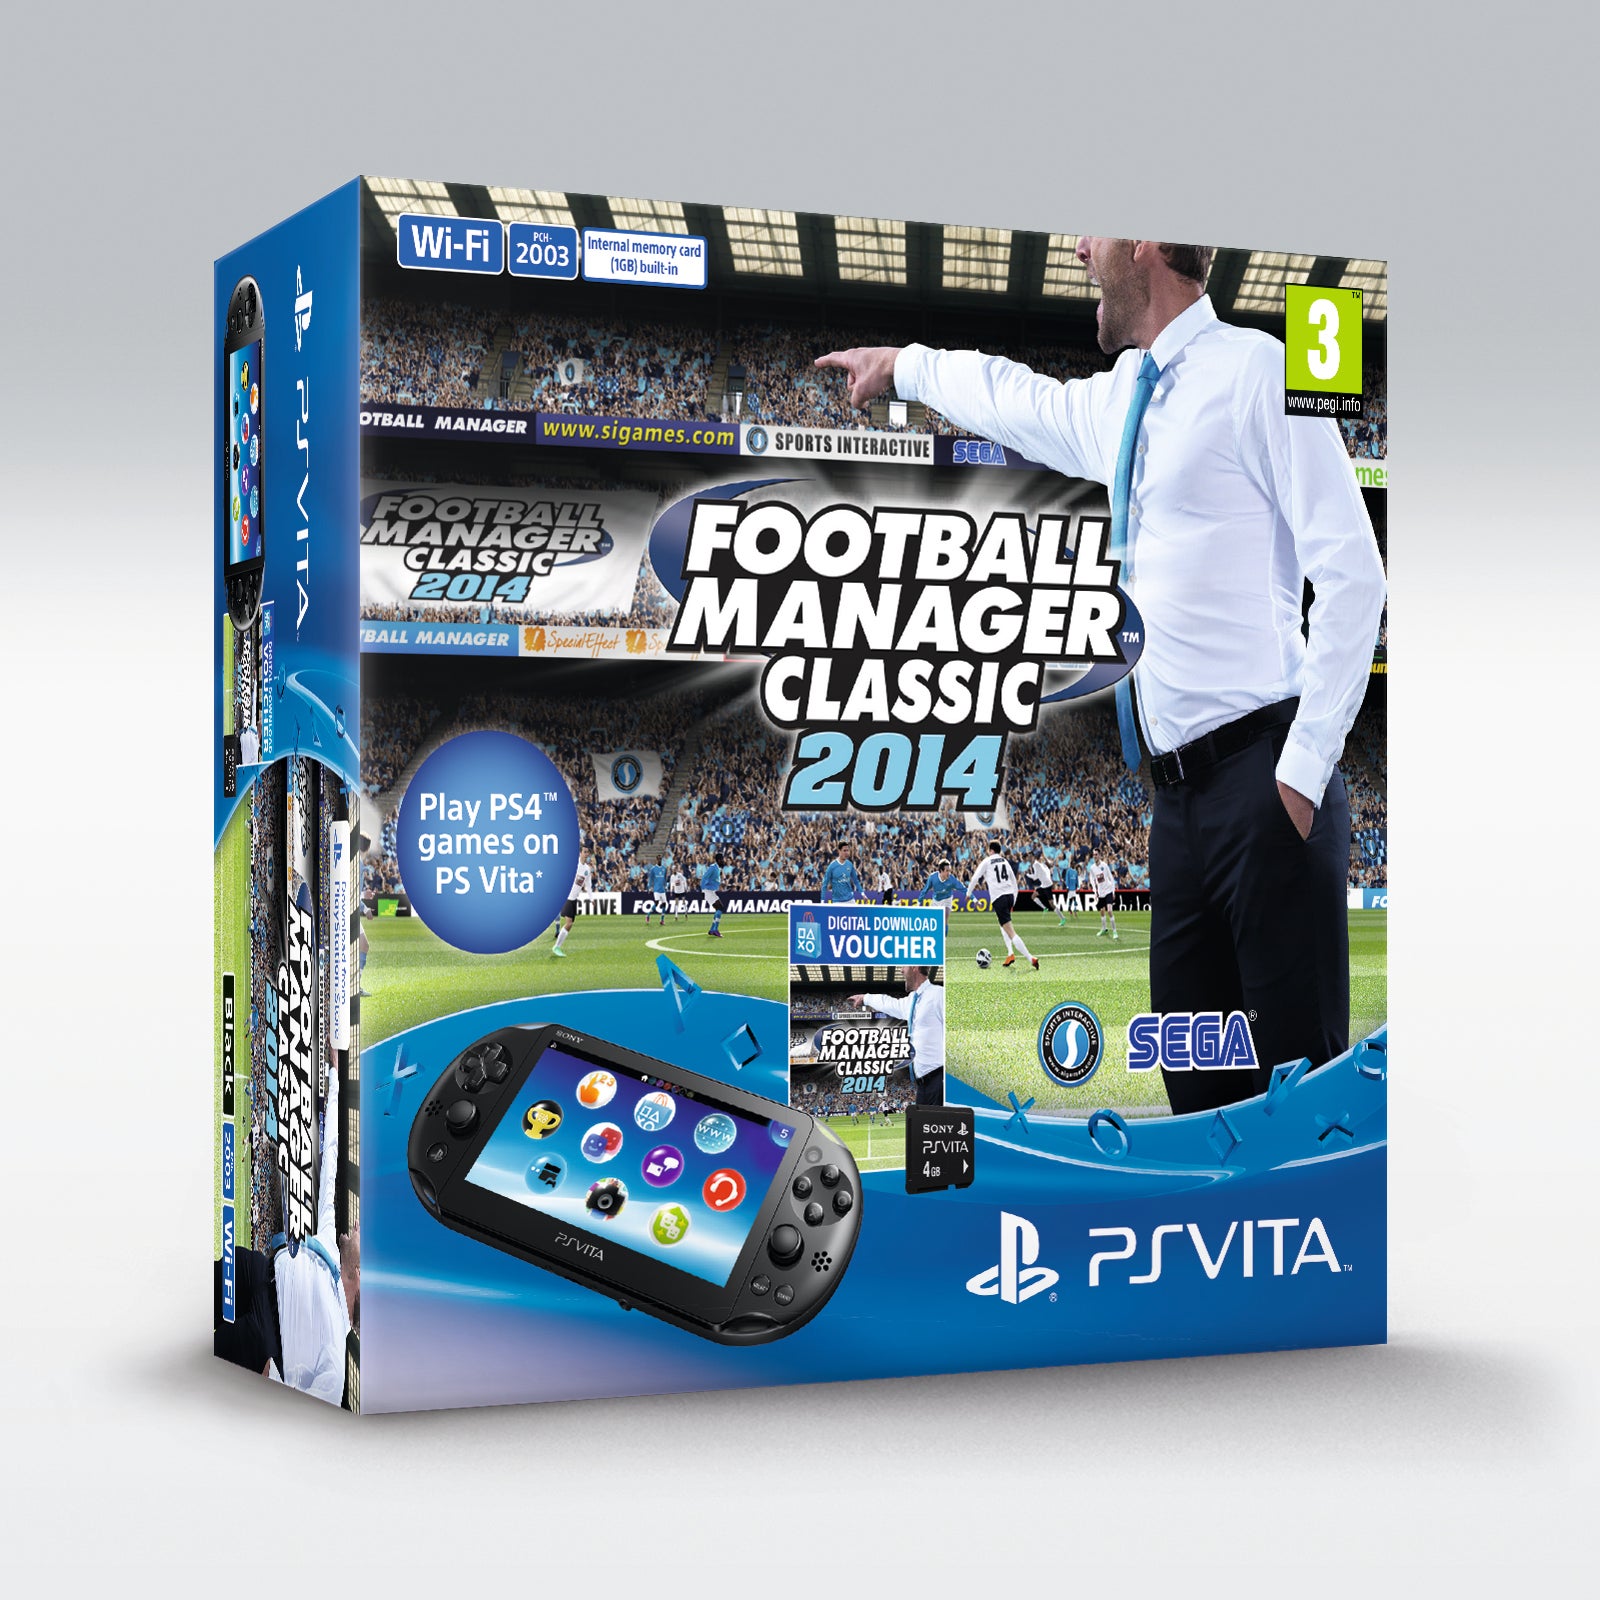 Image for Football Manager Classic 2014 PS Vita console bundle announced, out April 17